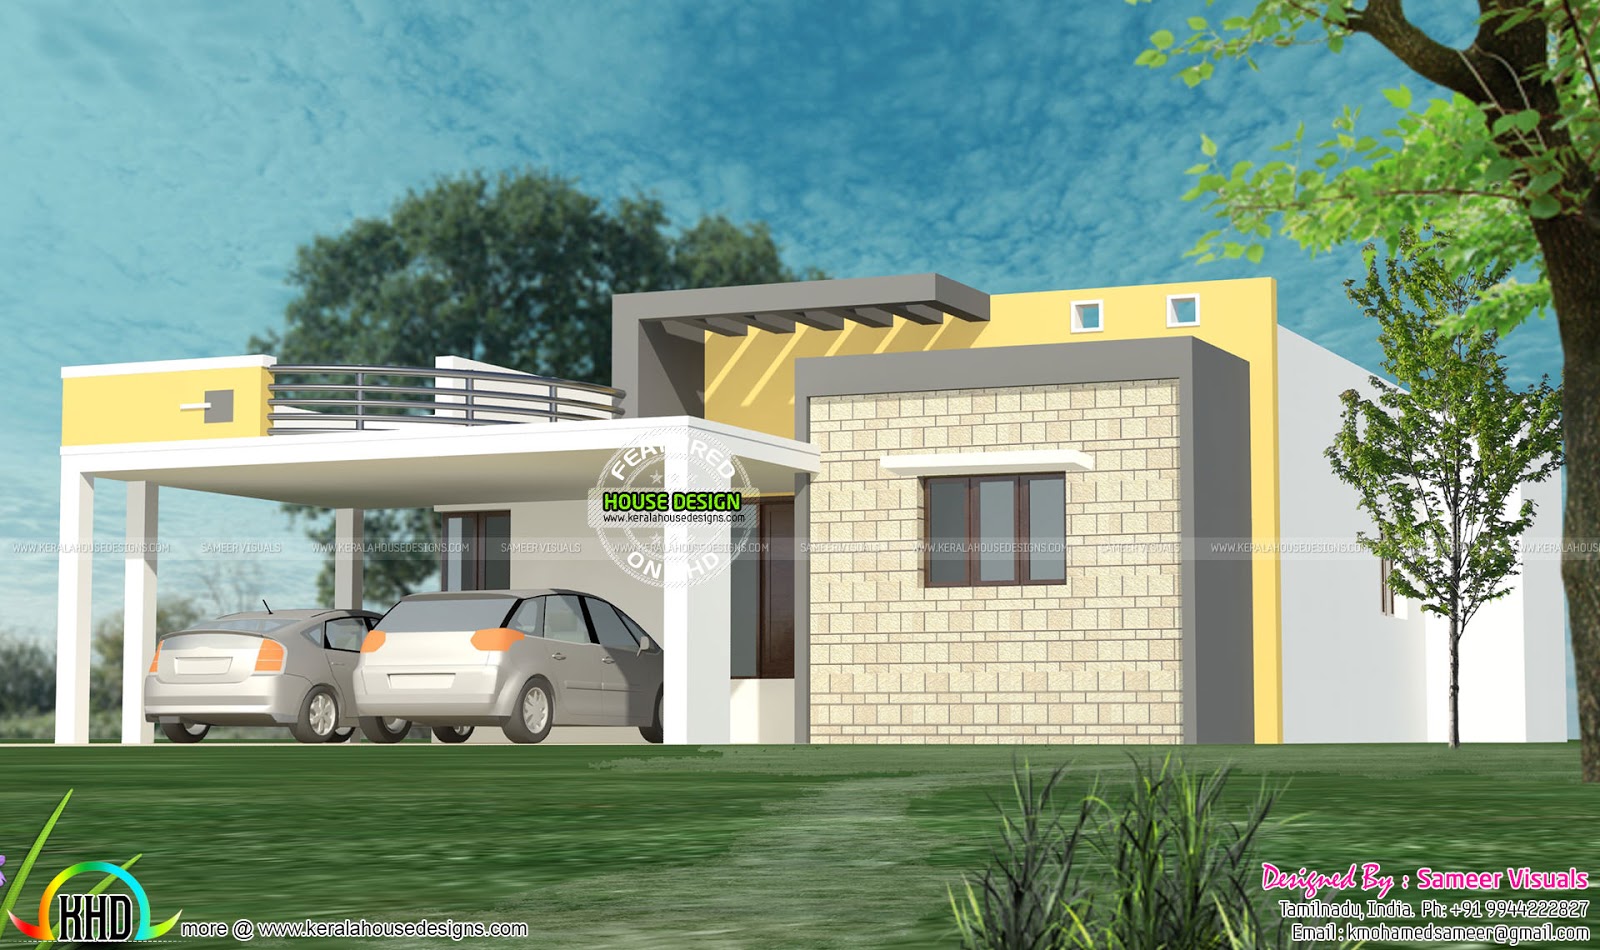 111 sq-m flat roof house plan - Kerala home design and floor plans